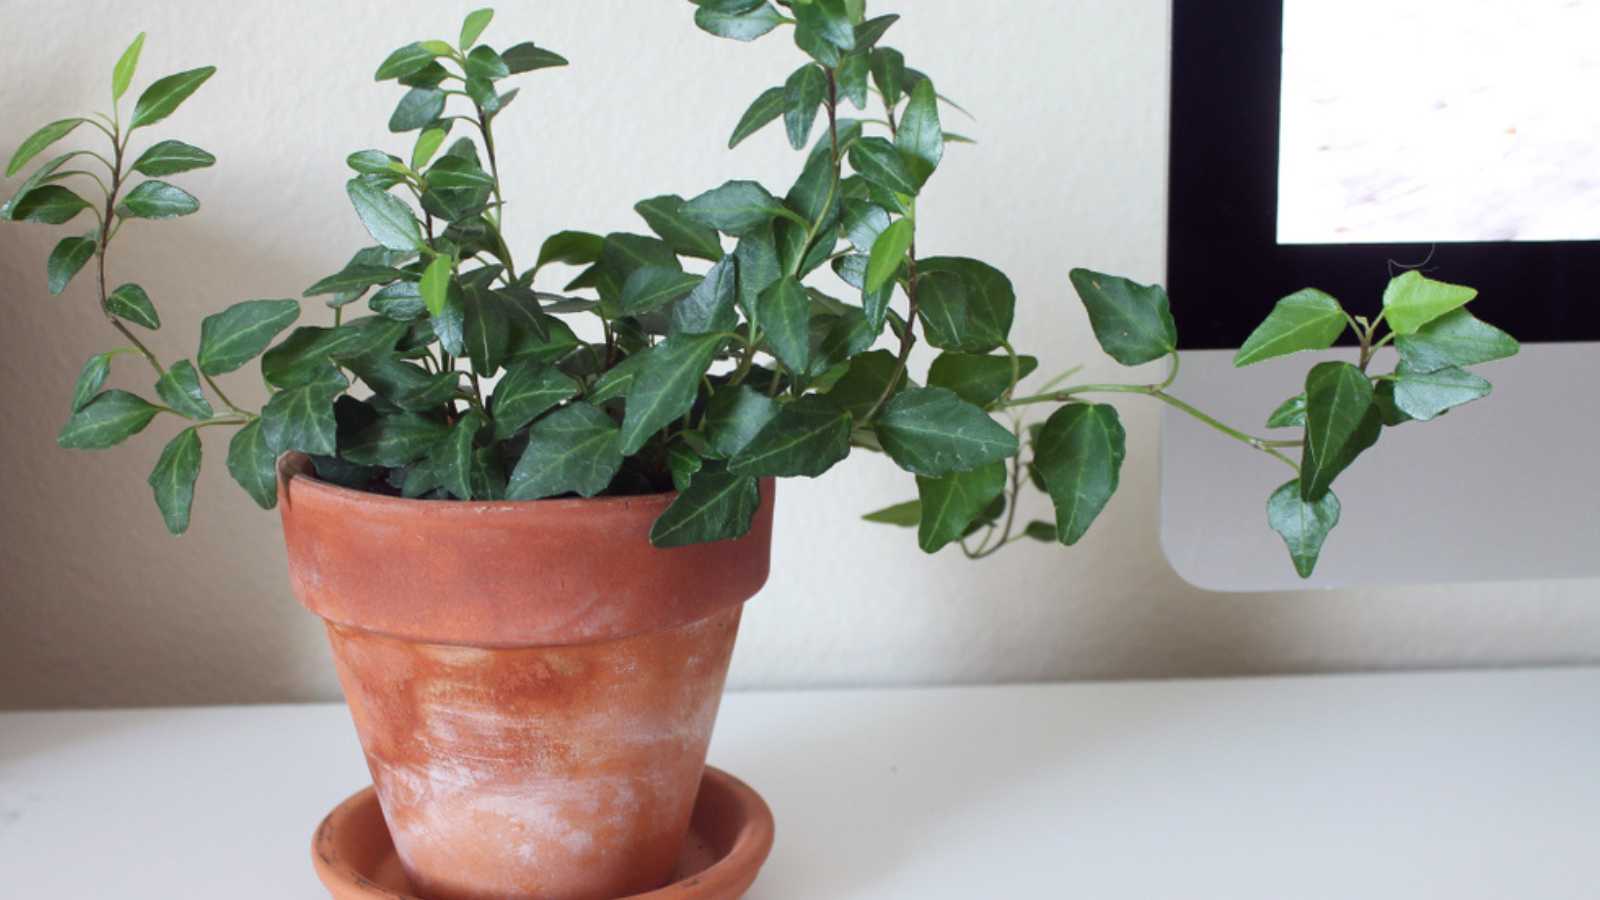 English ivy houseplant in terra cotta pot on desk table